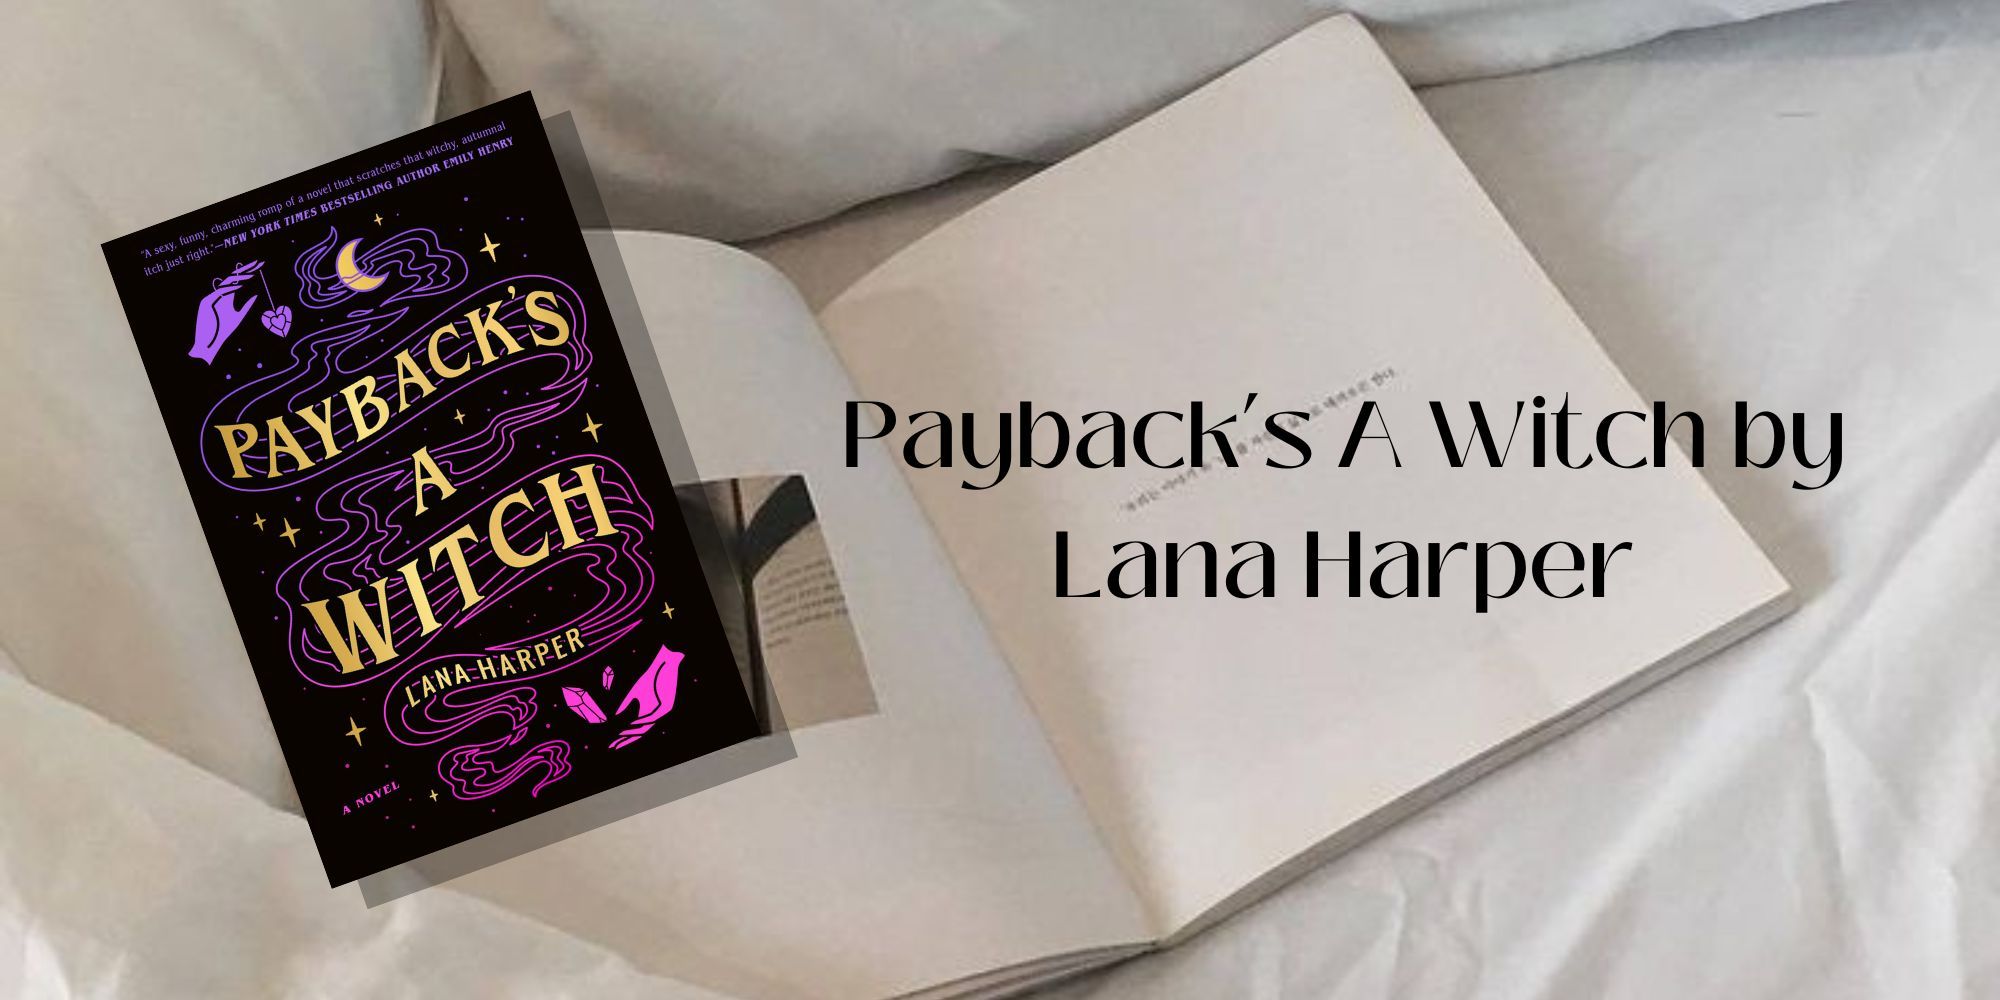 The cover of Payback’s A Witch by Lana Harper